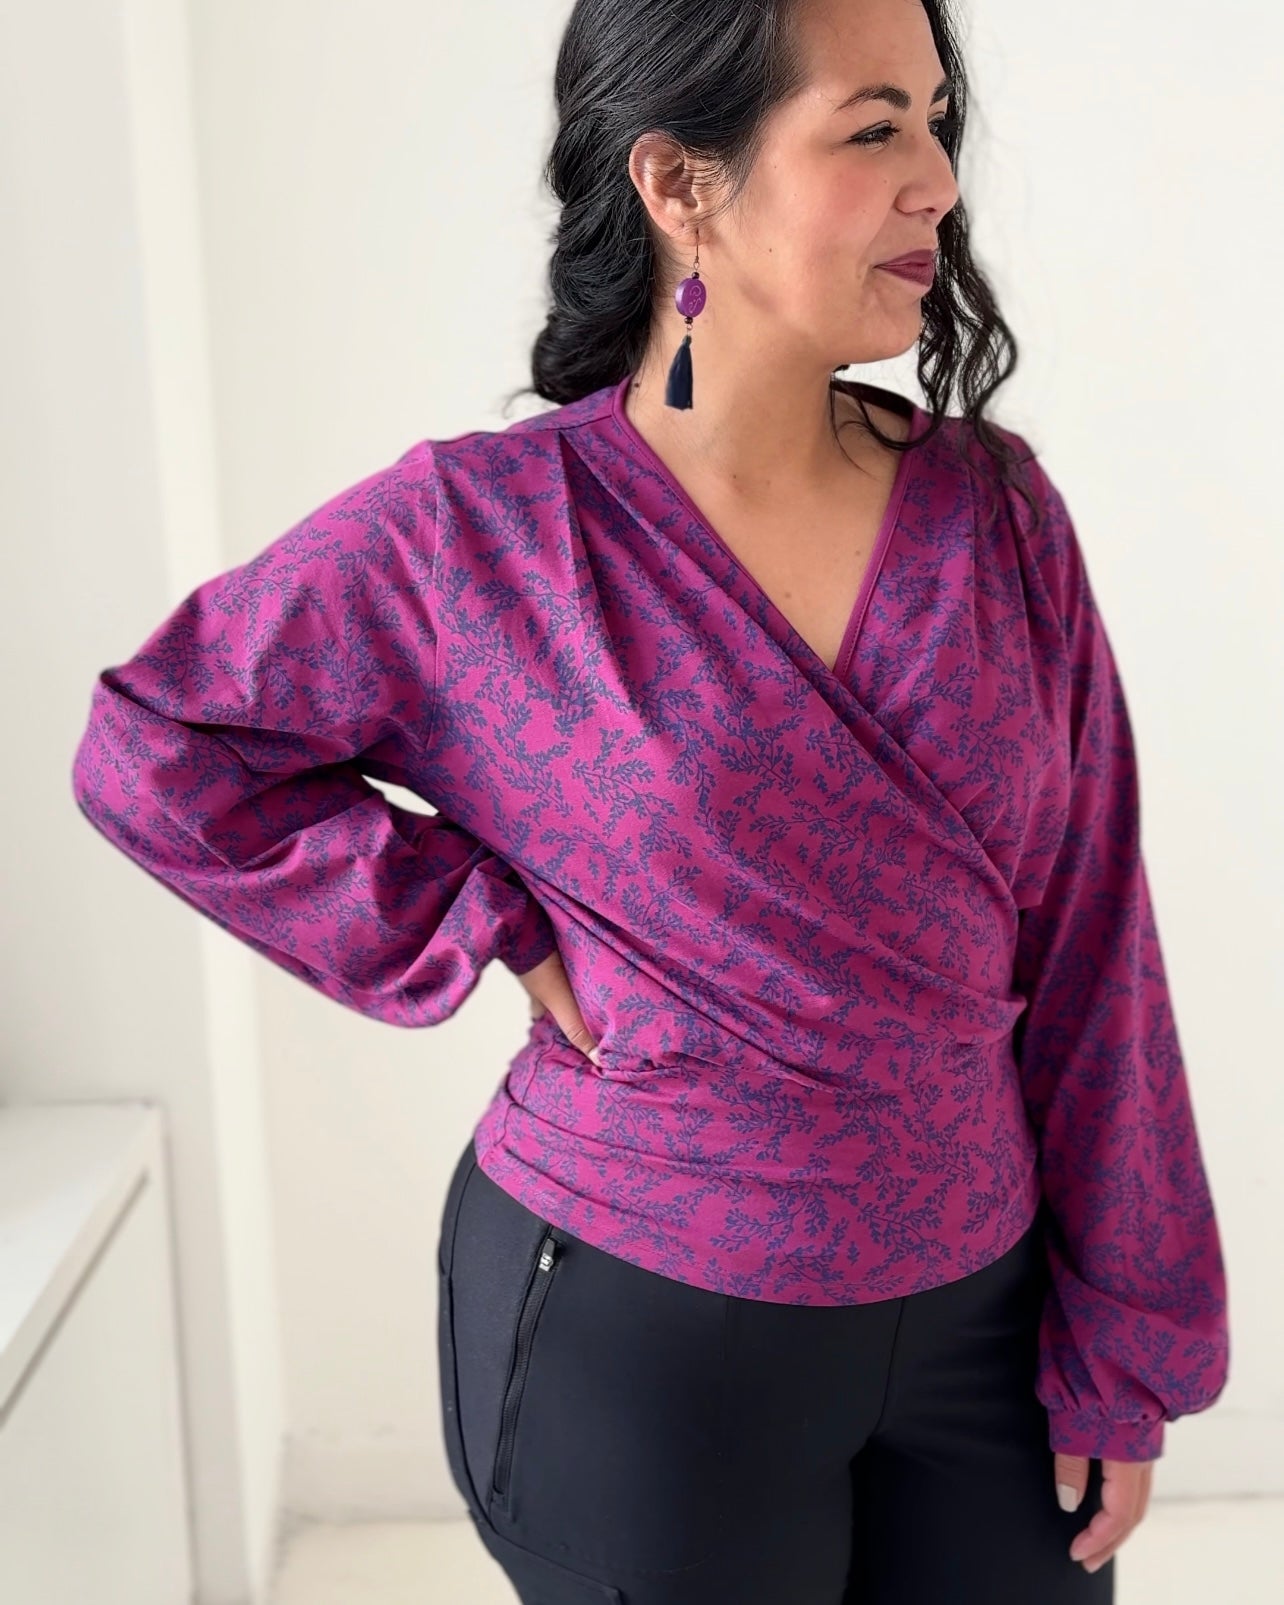 PEGGY printed top in Magenta/Navy